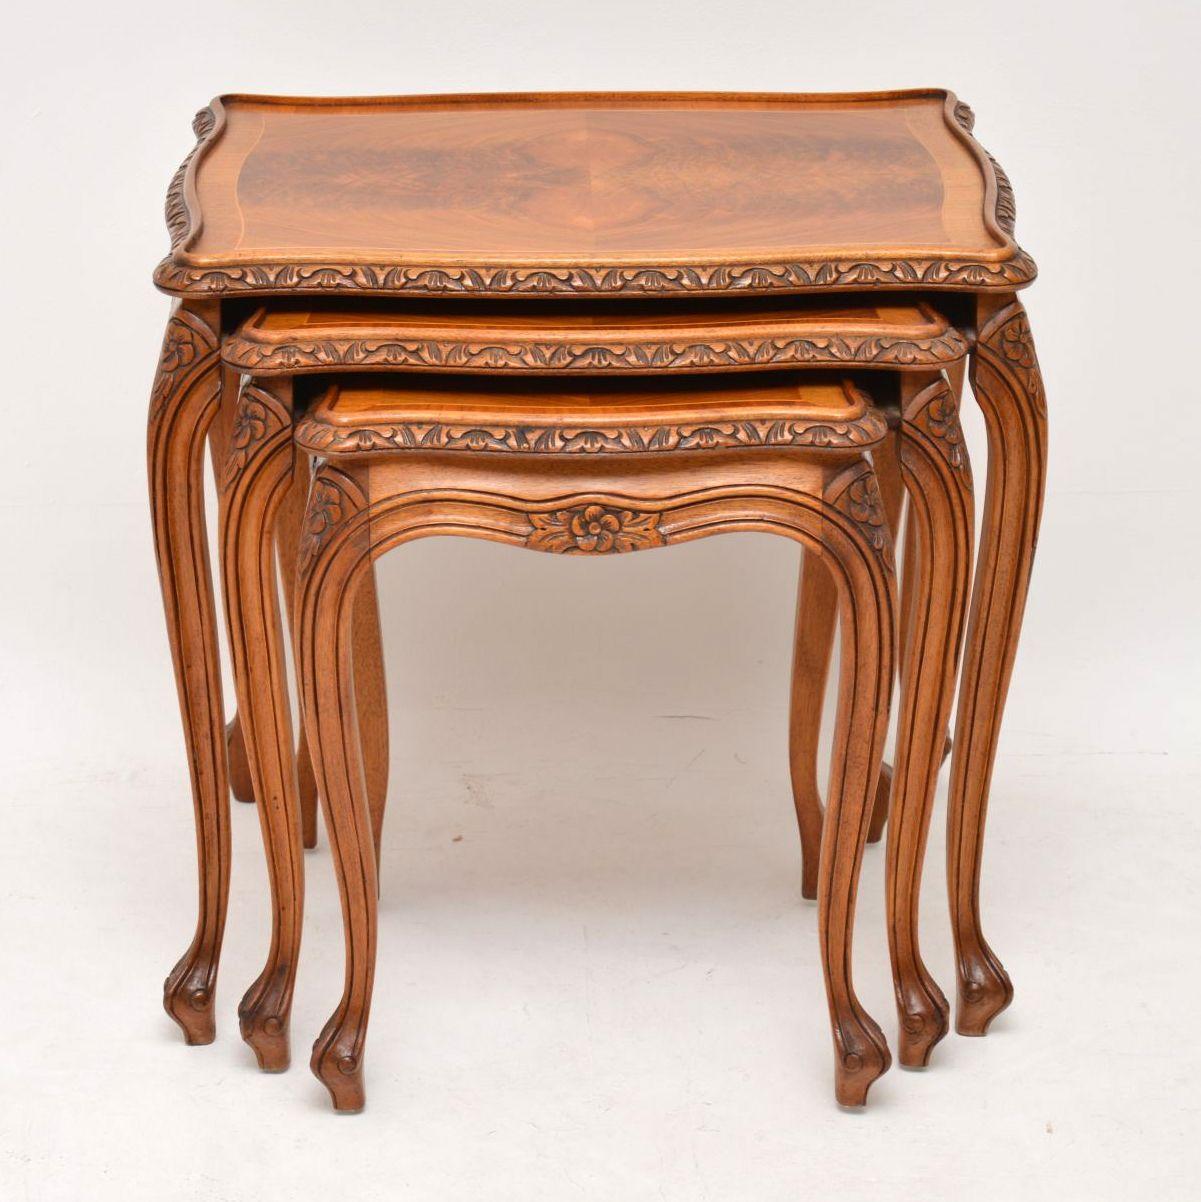 Antique French style walnut nest of three tables in excellent condition and dating to circa 1930s period. They are of high quality and have fine carvings around the shaped tops, between and on the tops of the solid walnut cabriole legs. The table